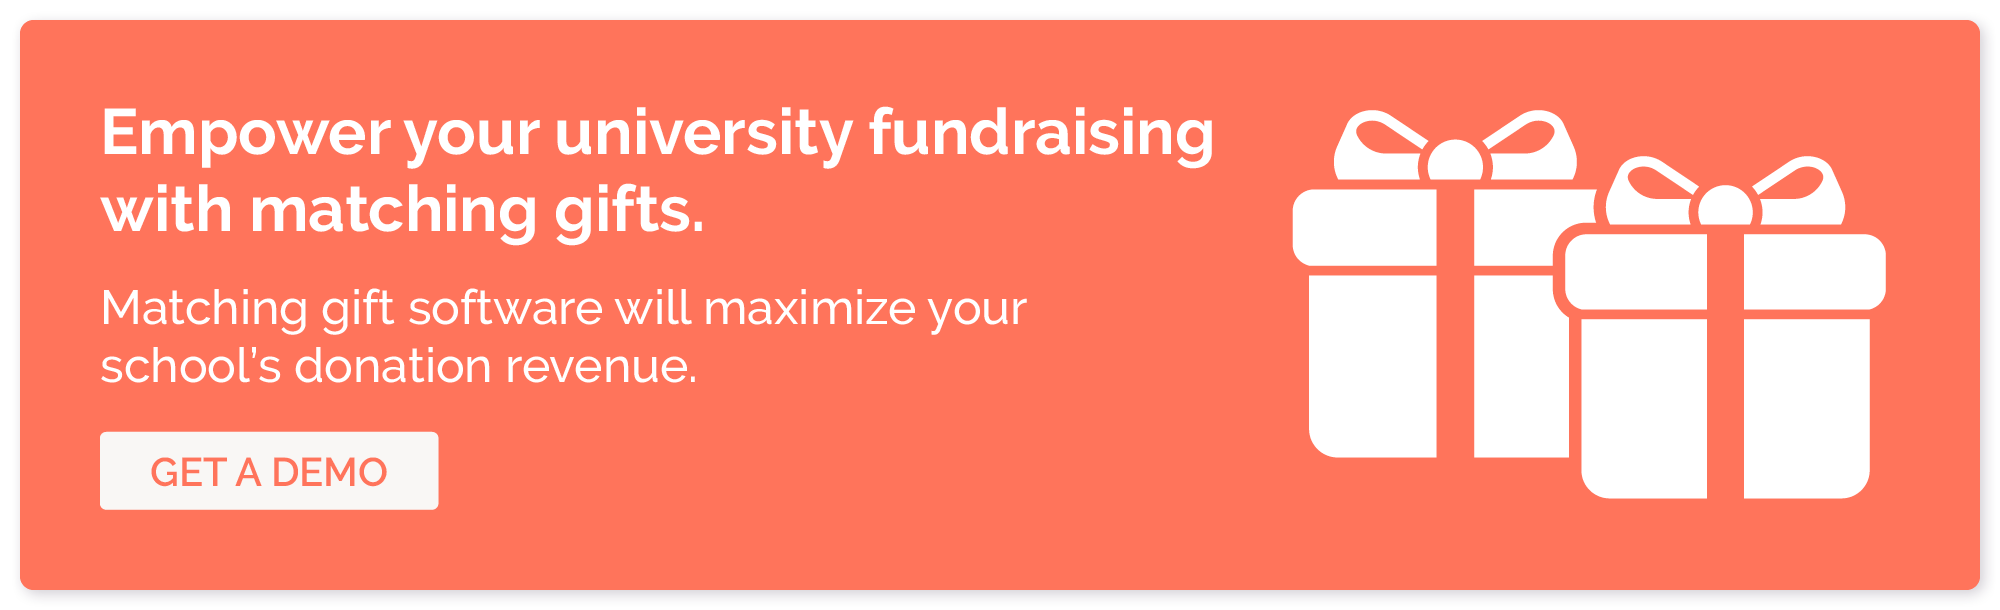 Click through to get a demo of our matching gift software and maximize your university fundraising efforts.